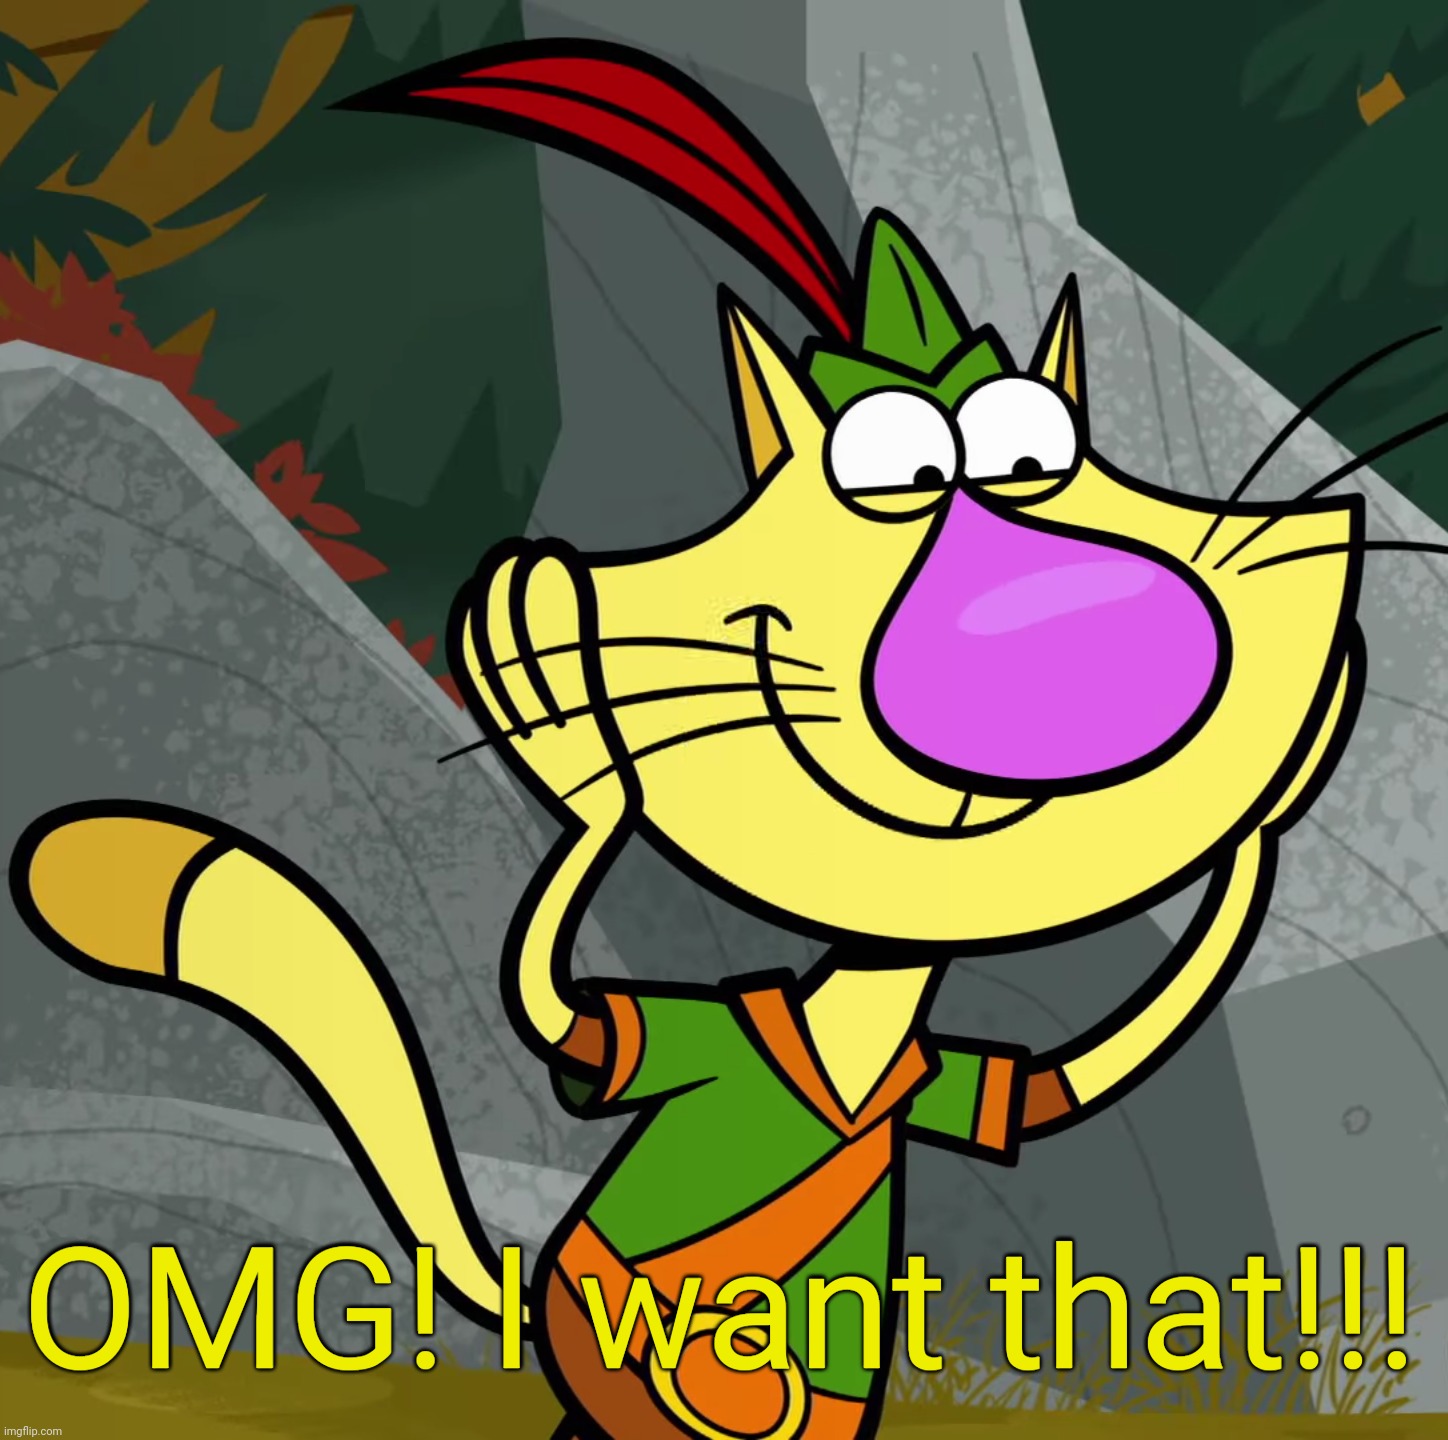 OMG! (Nature Cat) | OMG! I want that!!! | image tagged in omg nature cat | made w/ Imgflip meme maker